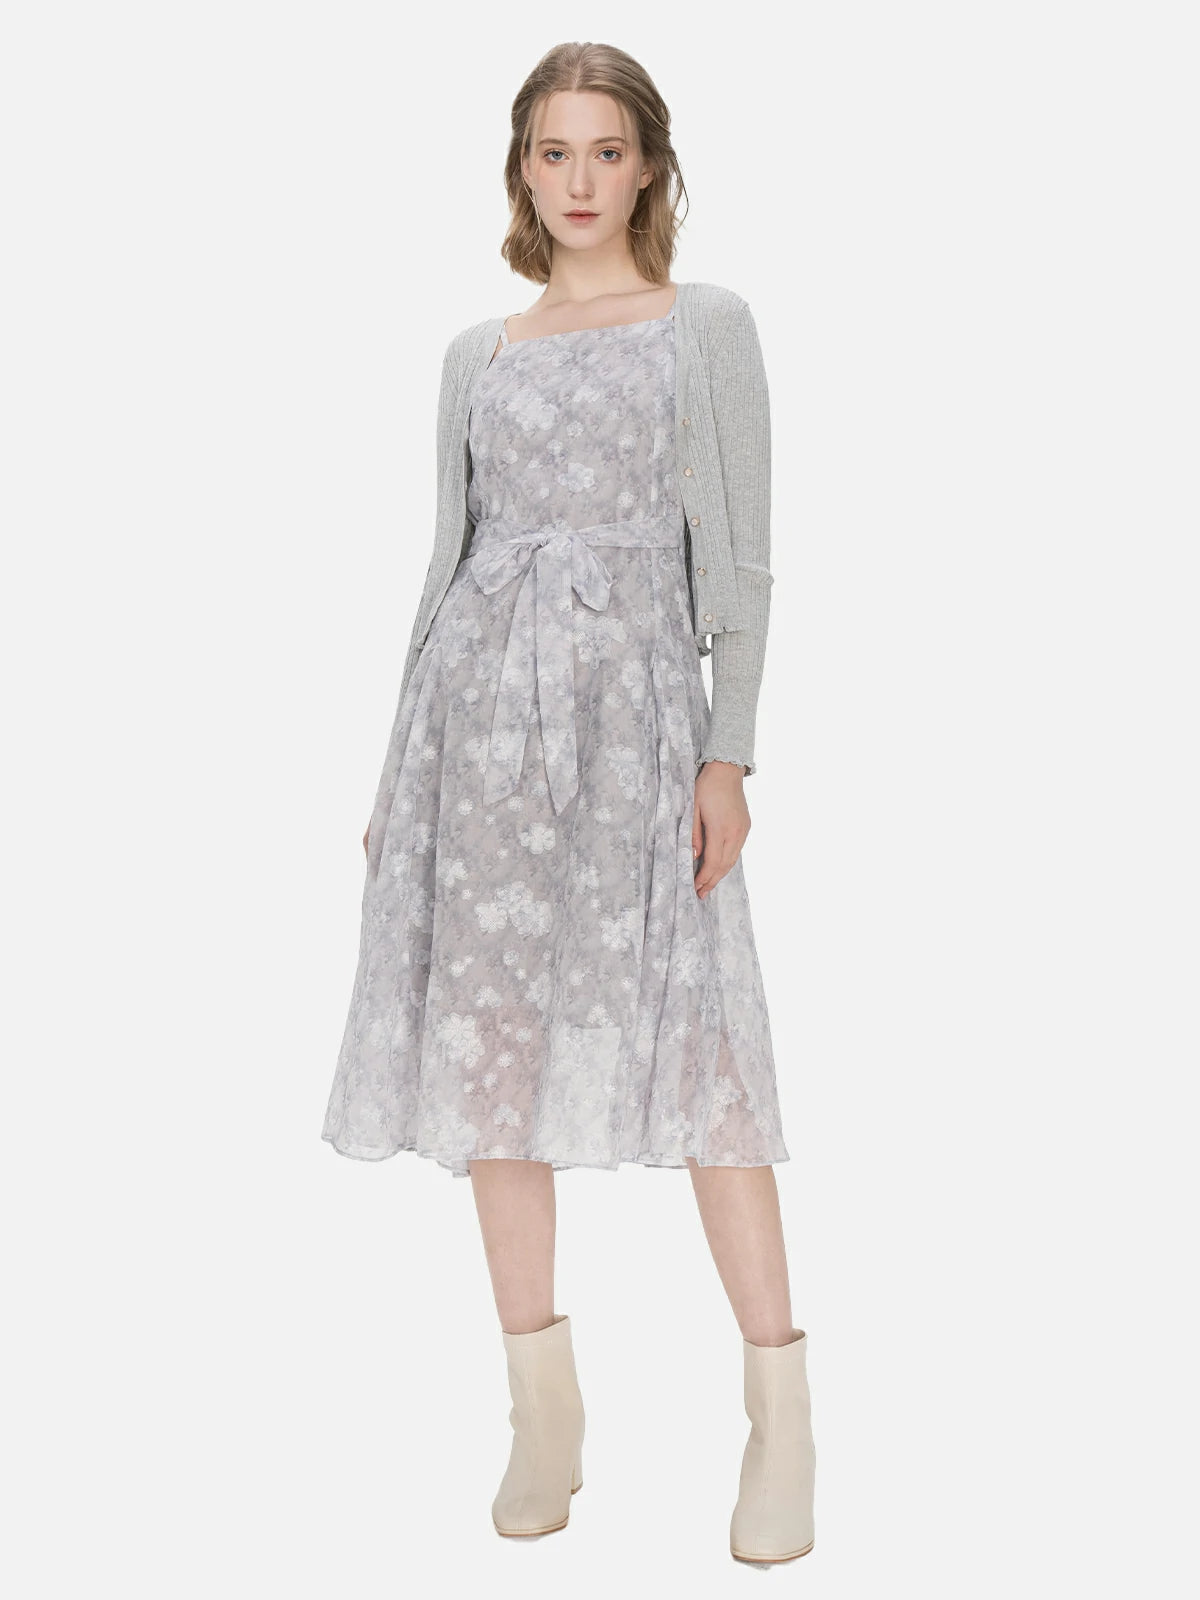 Define your fashion identity with this classic and stylish two-piece ensemble, showcasing a V-neck knit cardigan with ruffle hem and buttons, and a spaghetti strap floral chiffon dress in a gray color palette, creating a timeless and elegant outfit.